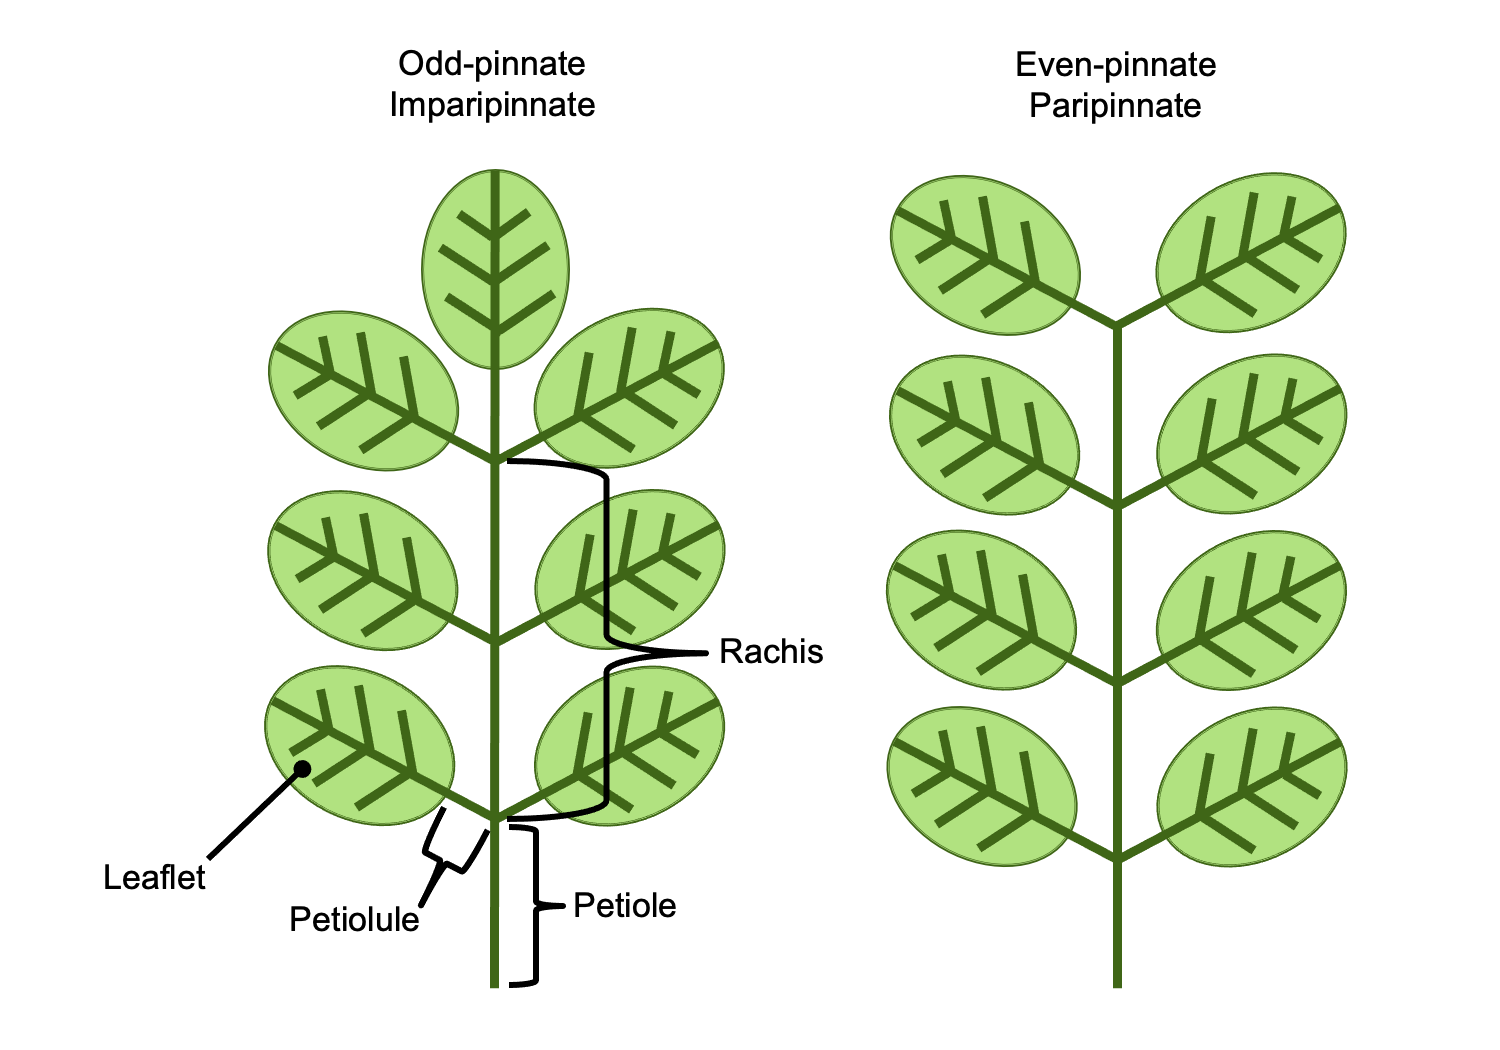 Diagrams of odd-pinnate and even-pinnate leaves. Odd-pinnate leaves end with a leaflet, whereas even-pinnate leaves do not.